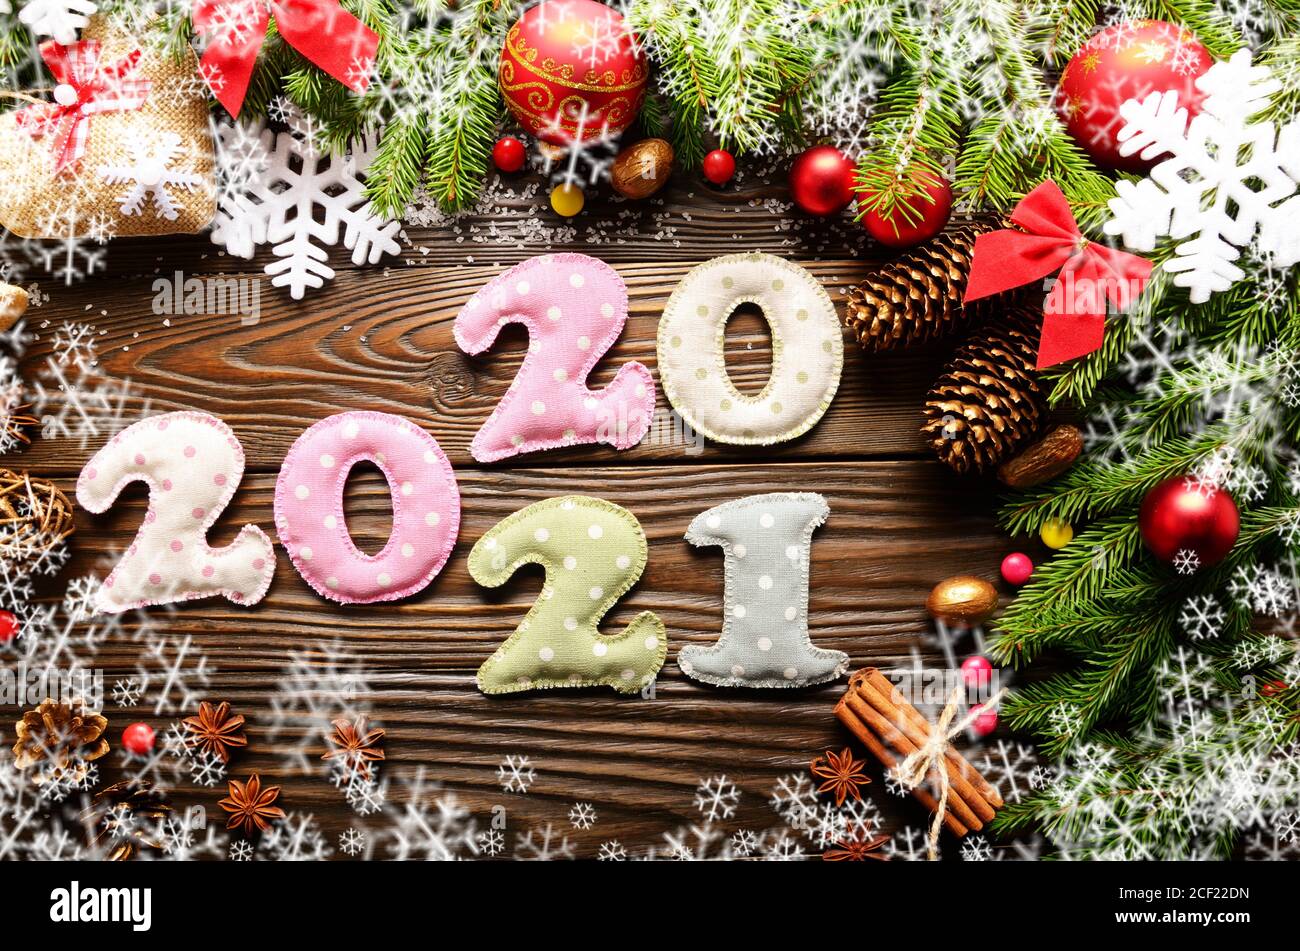 Colorful stitched digits 2020 2021 of polkadot fabric with Christmas decorations flat lay on wooden background. Stock Photo